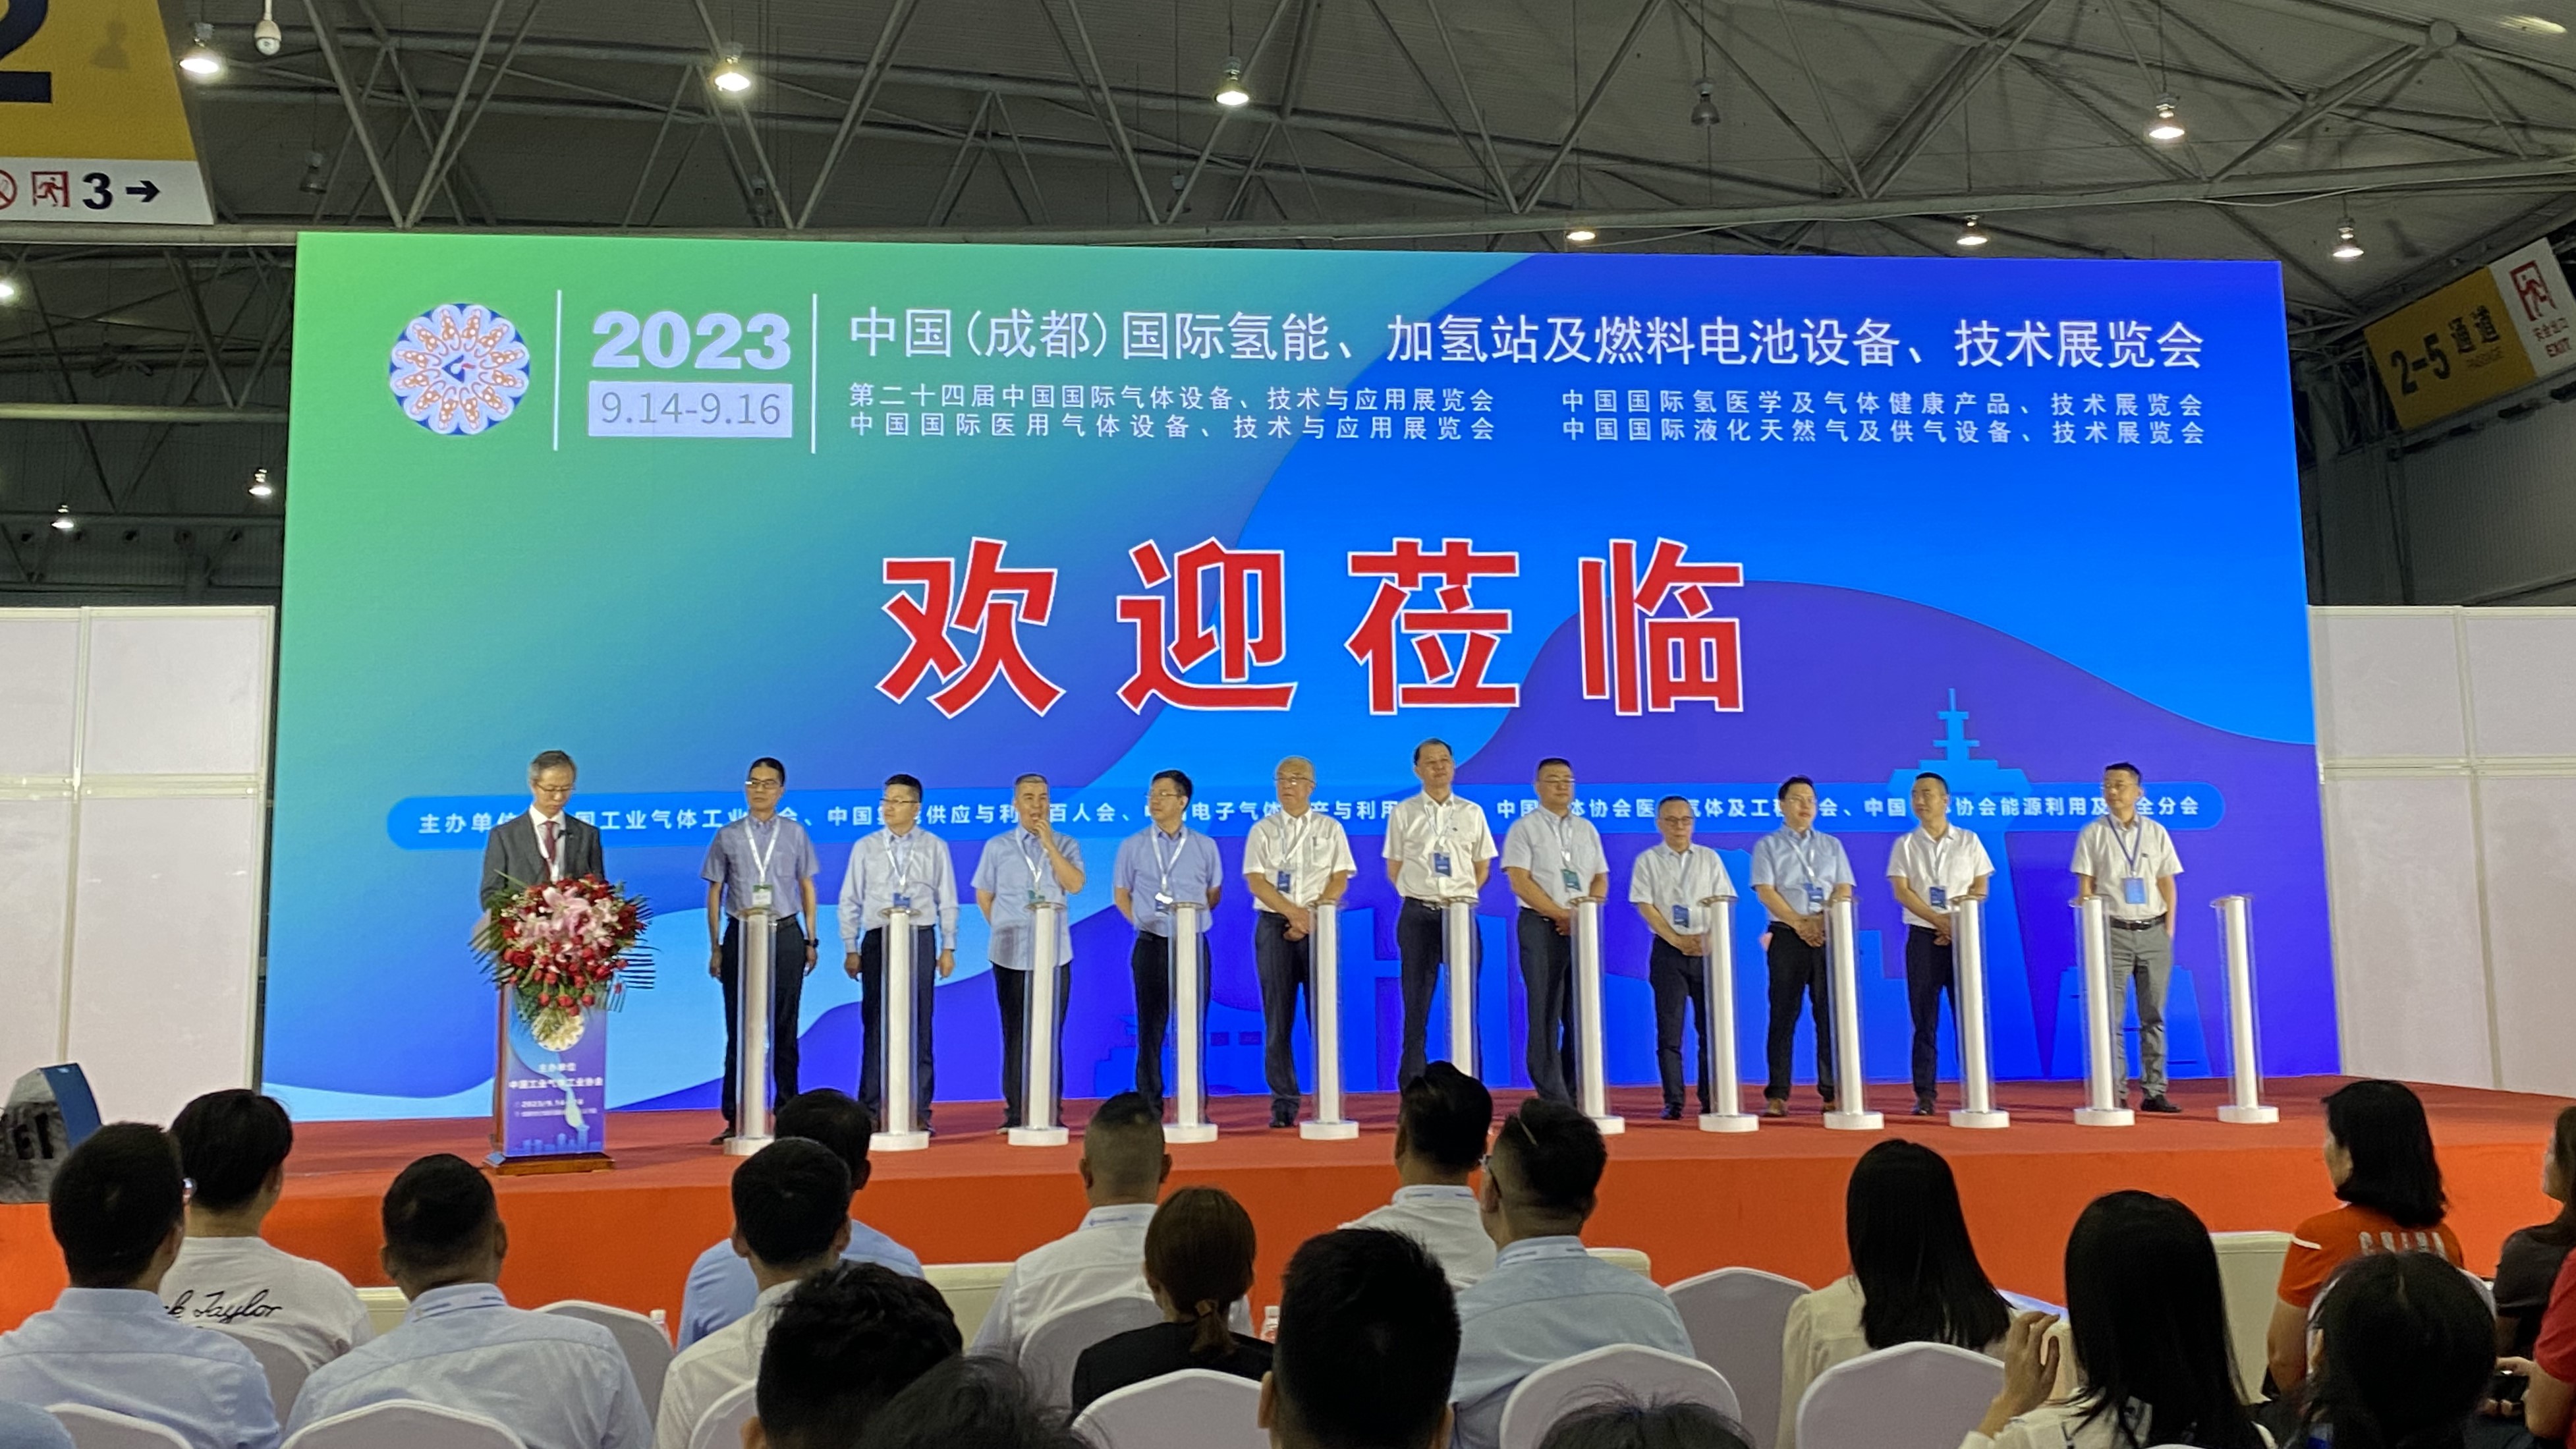 Ally Hydrogen Energy Was Invited to Participate in the Series Exhibition of China Gas Association